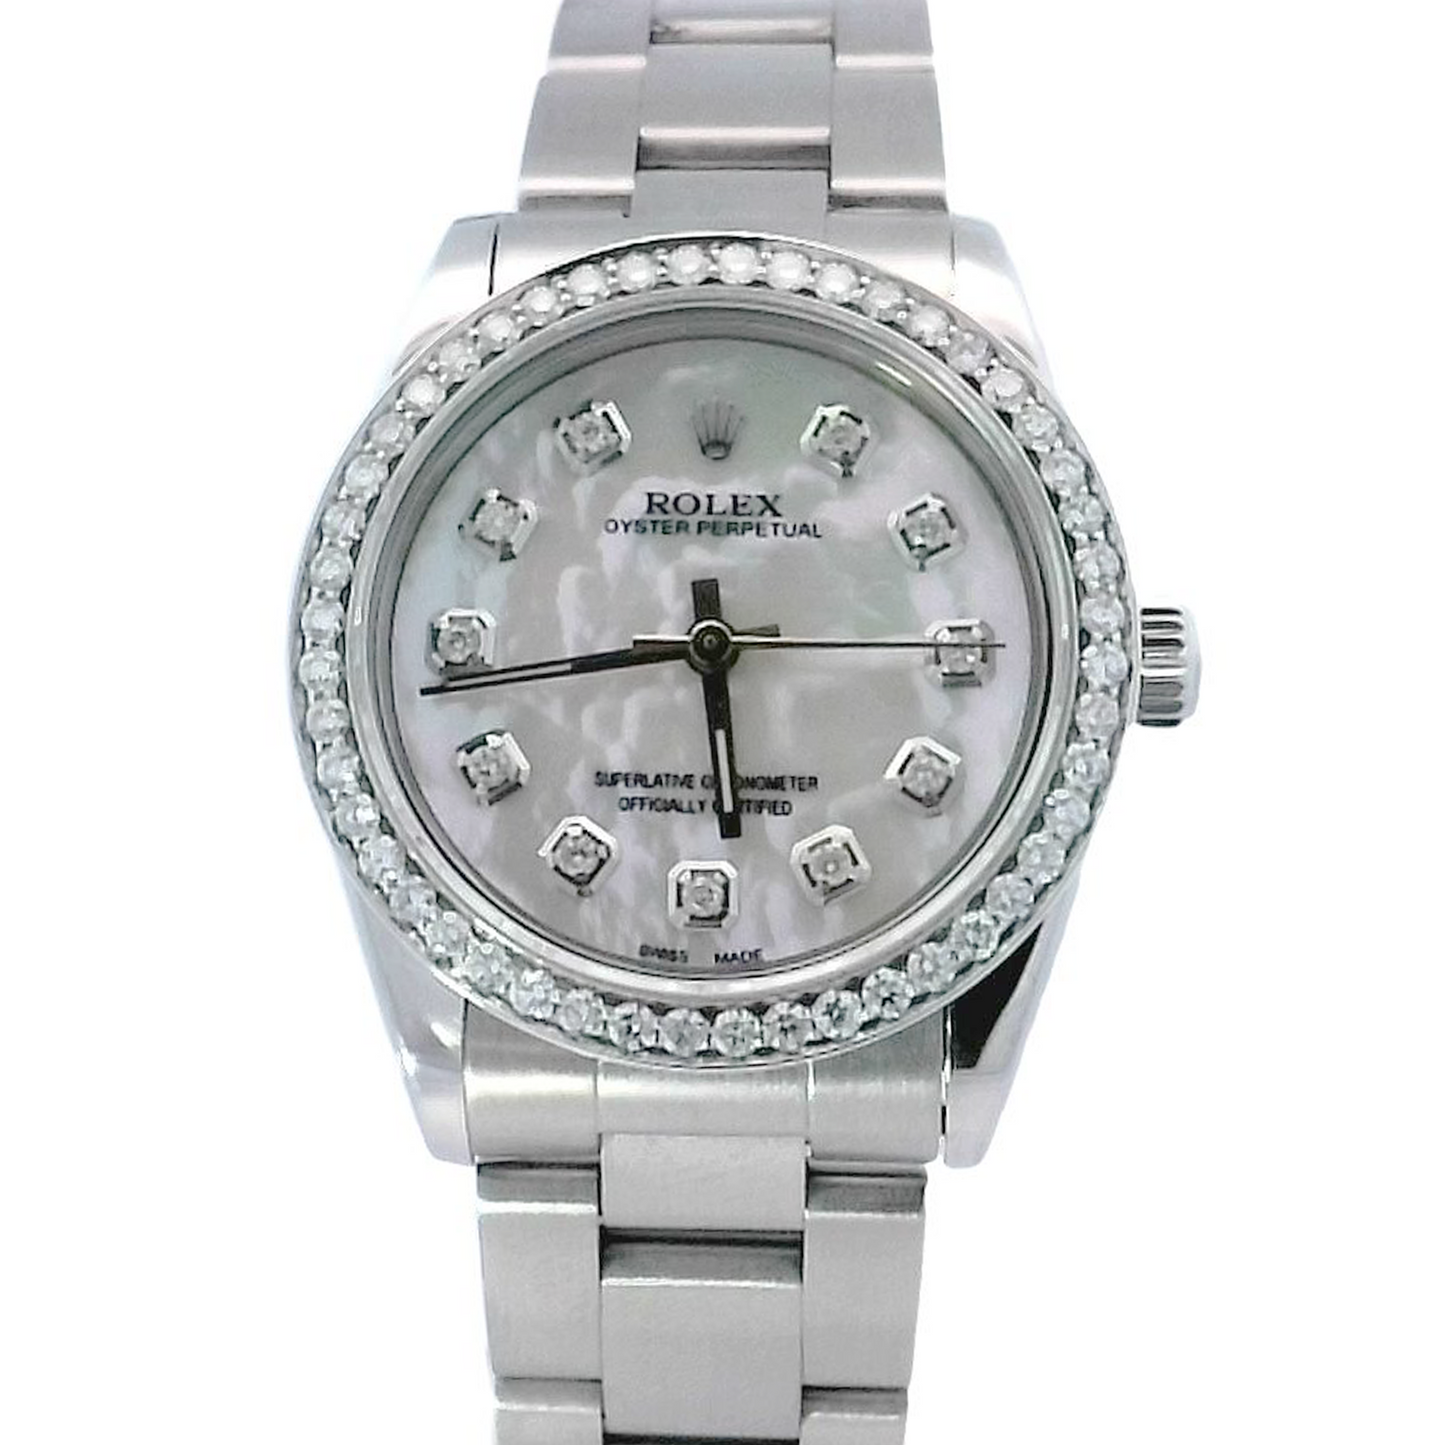 Rolex Oyster Perpetual Stainless Steel 31mm White MOP Diamond Dial Watch Reference #: 77080